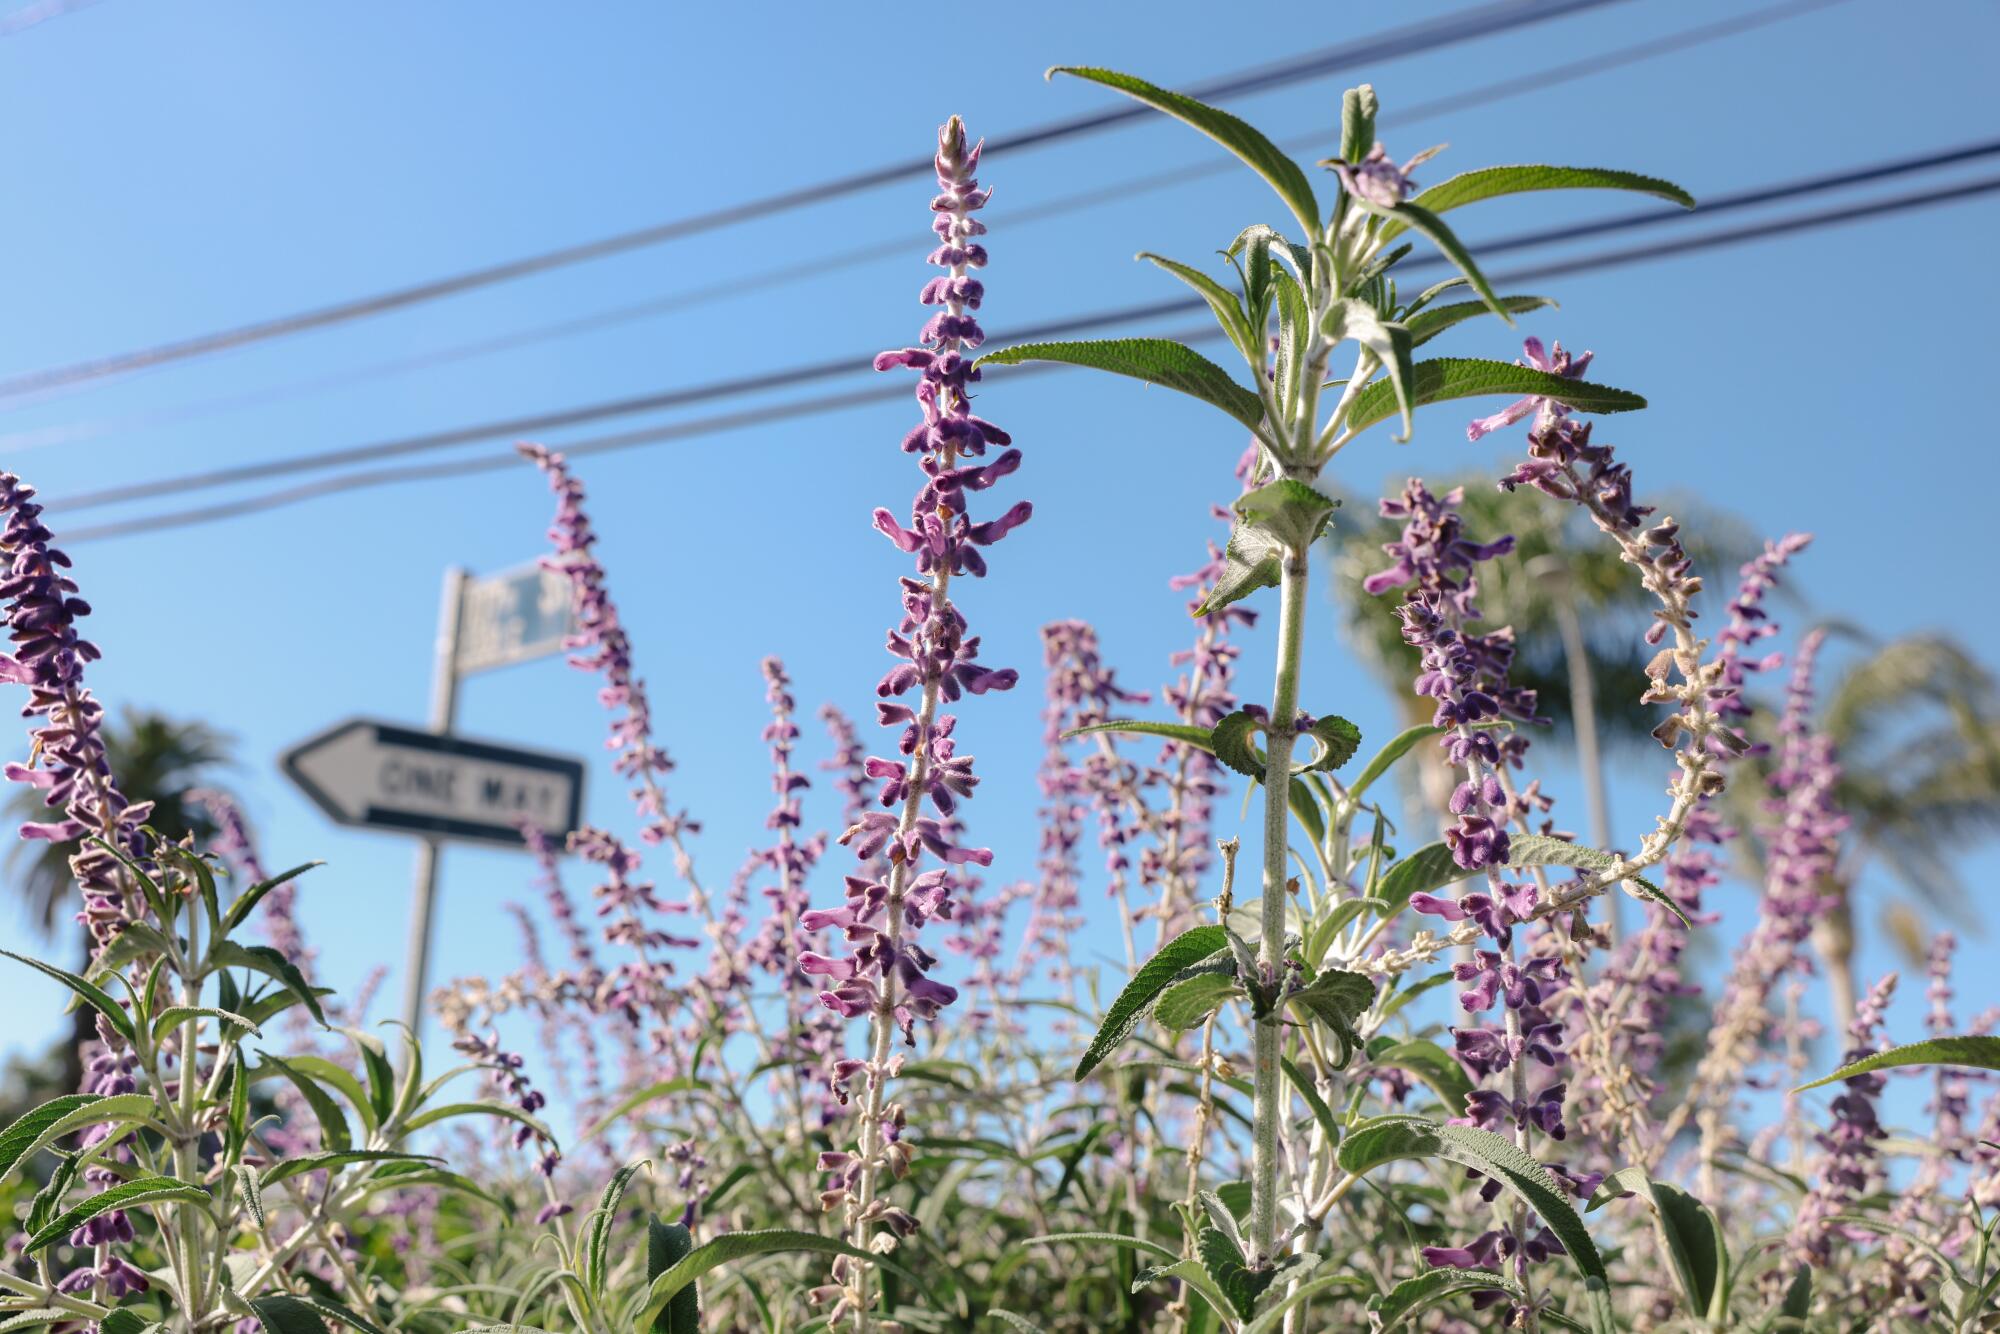 Mexican bush sage blooms with violet towers of flowers in Stephen Reid's yard.